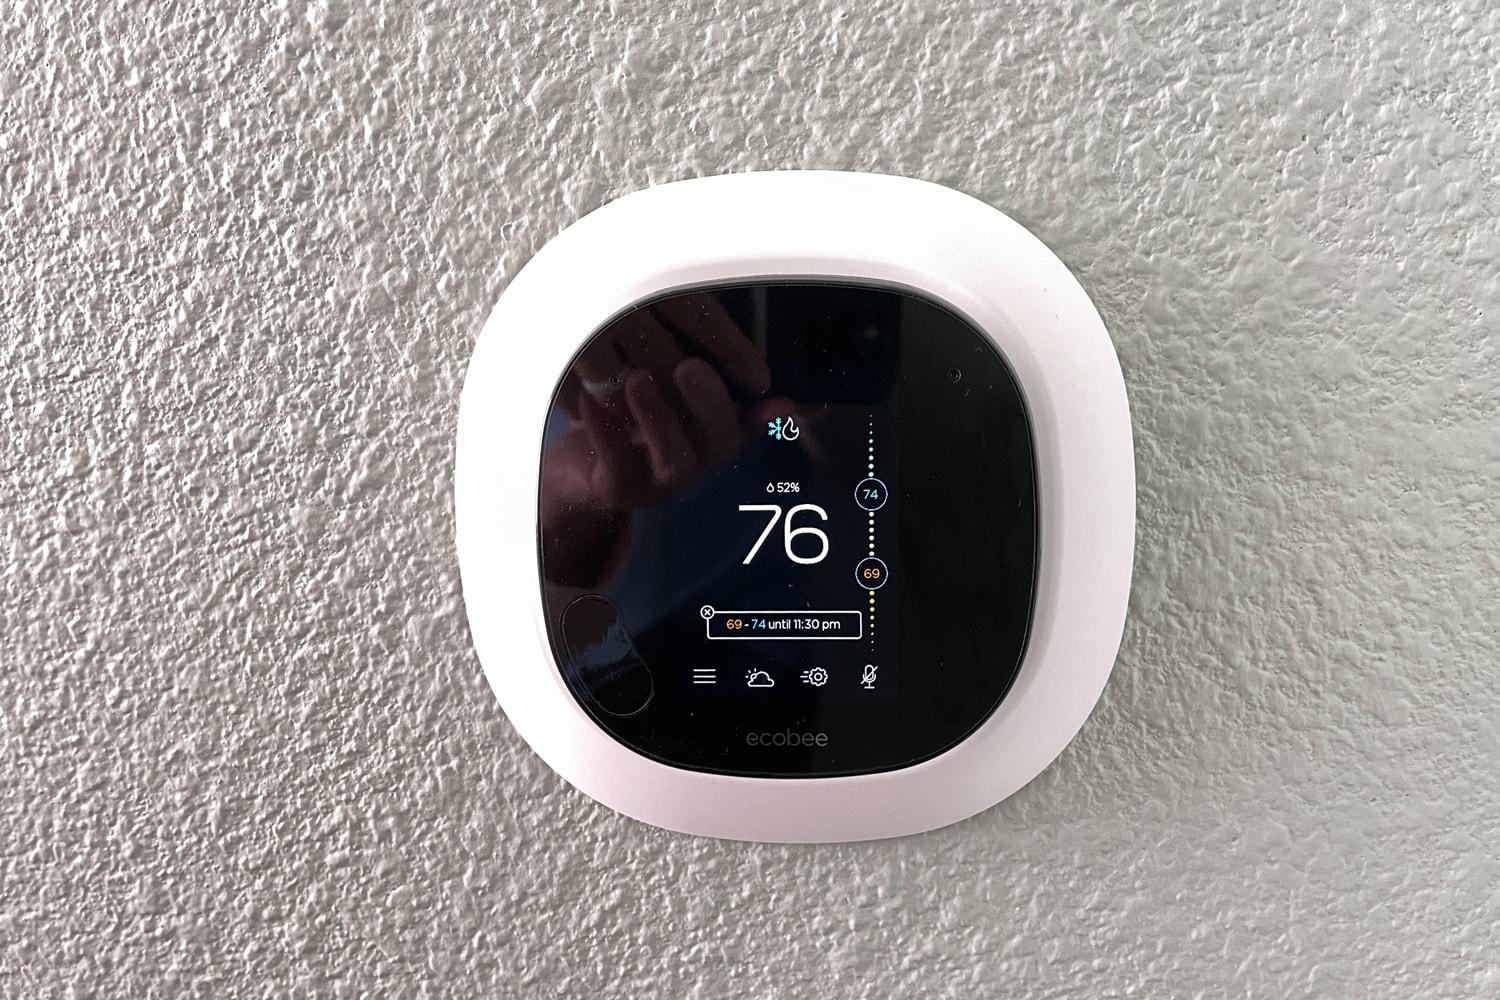  An Ecobee smart thermostat in a home